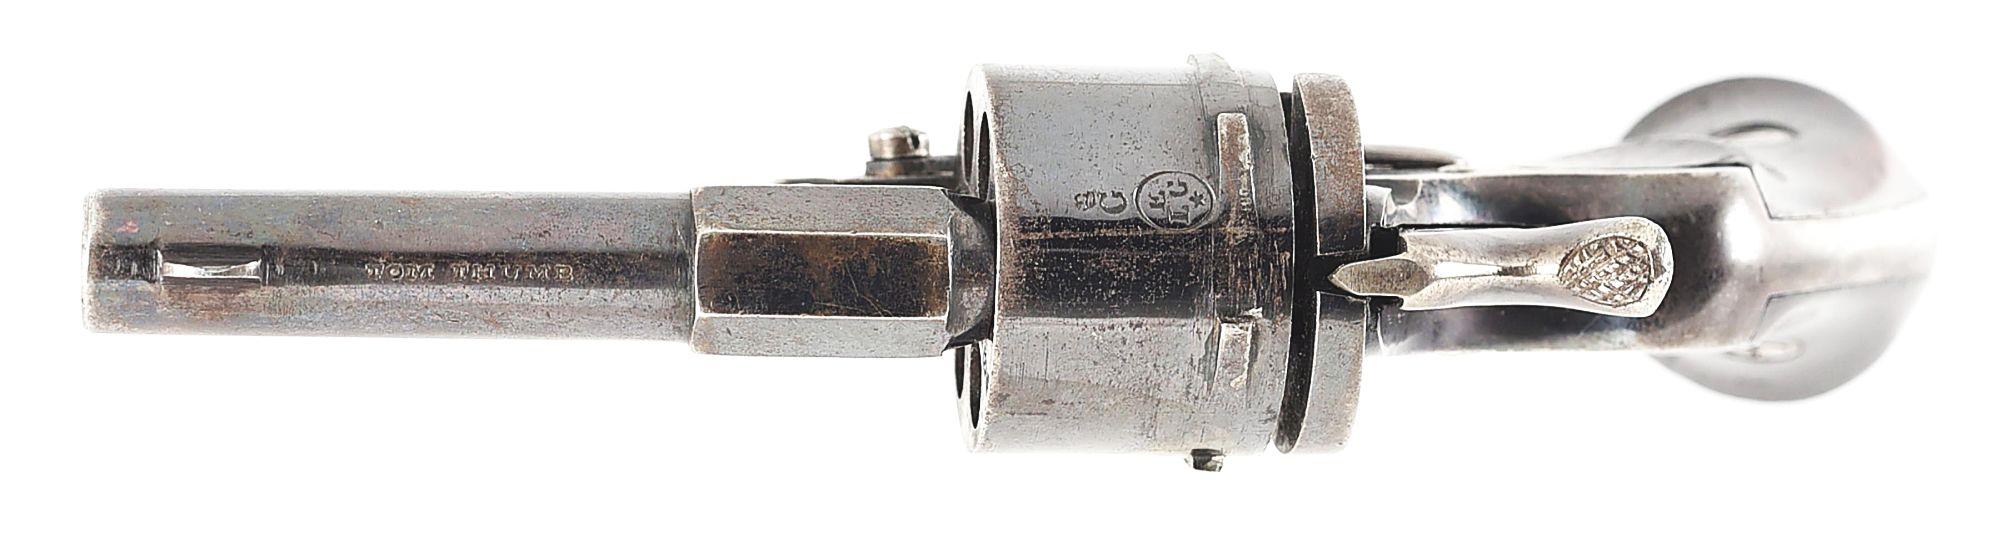 (A) DIMINUTIVE DALY ARMS CO. TOM THUMB DOUBLE ACTION REVOLVER.